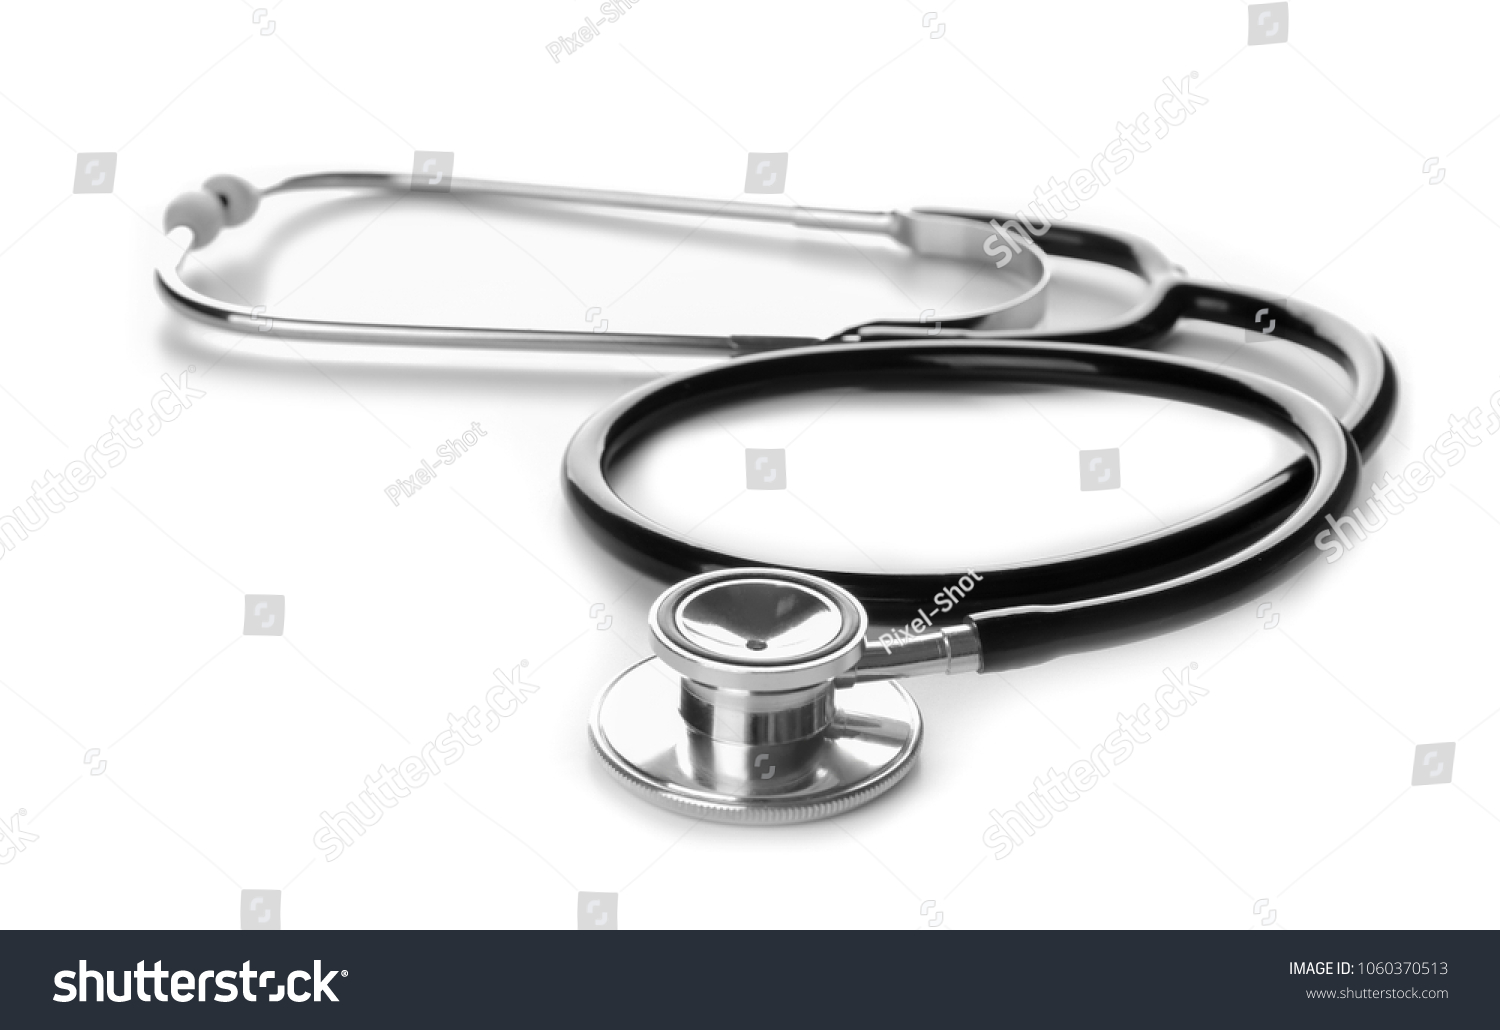 Medical stethoscope on white background. Health care concept #1060370513